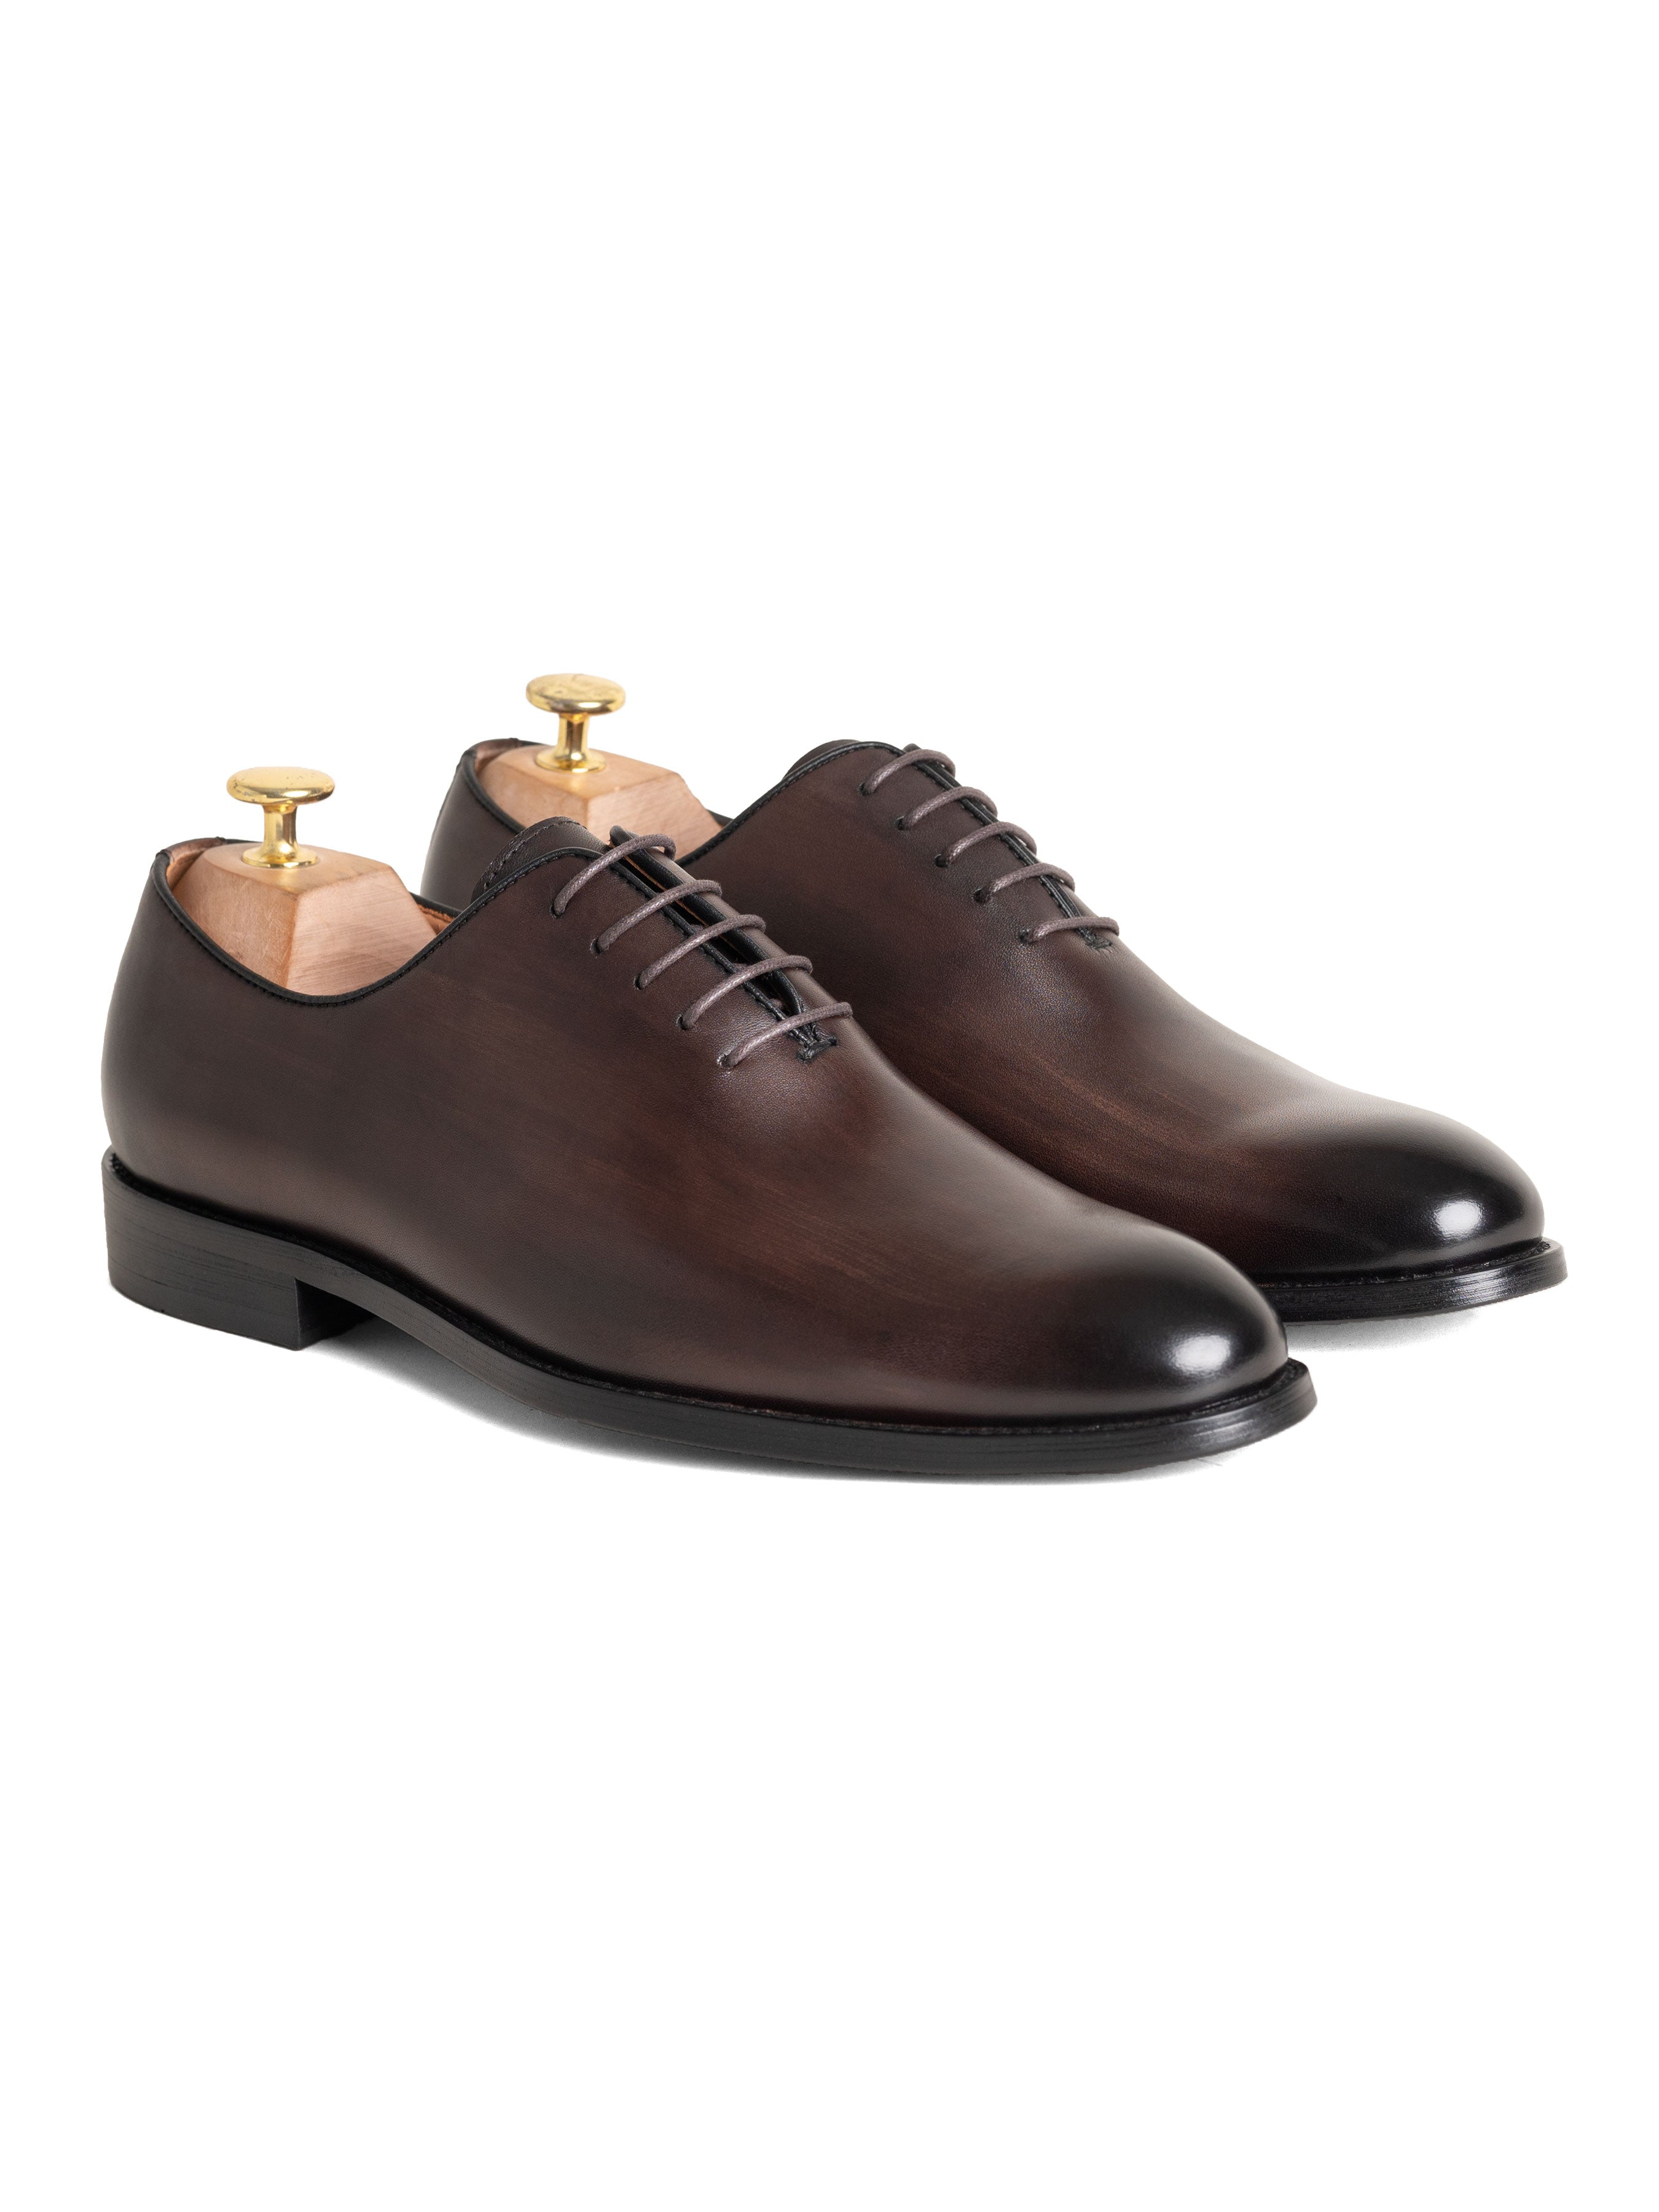 Wholecut Oxford  - Dark Brown Lace up (Hand Painted Patina) - Zeve Shoes